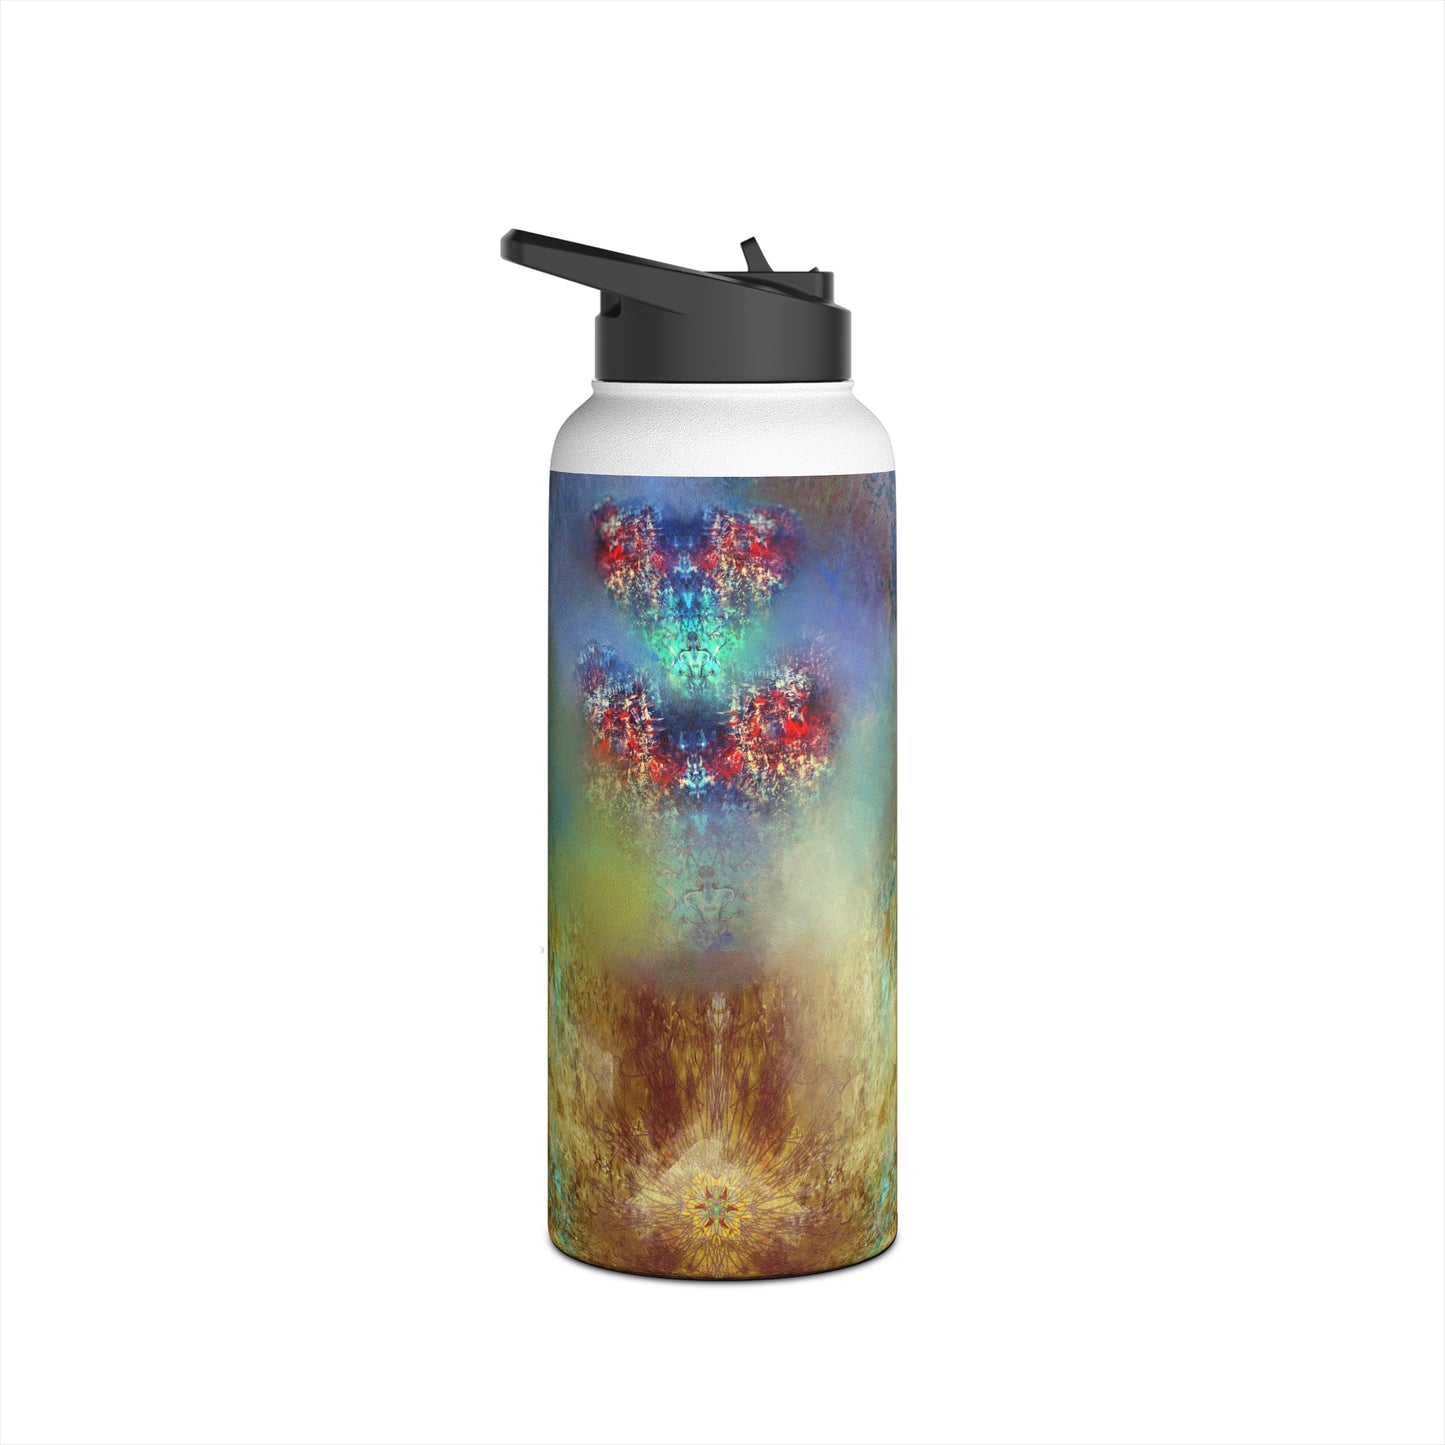 Blessed Visions Water Bottle